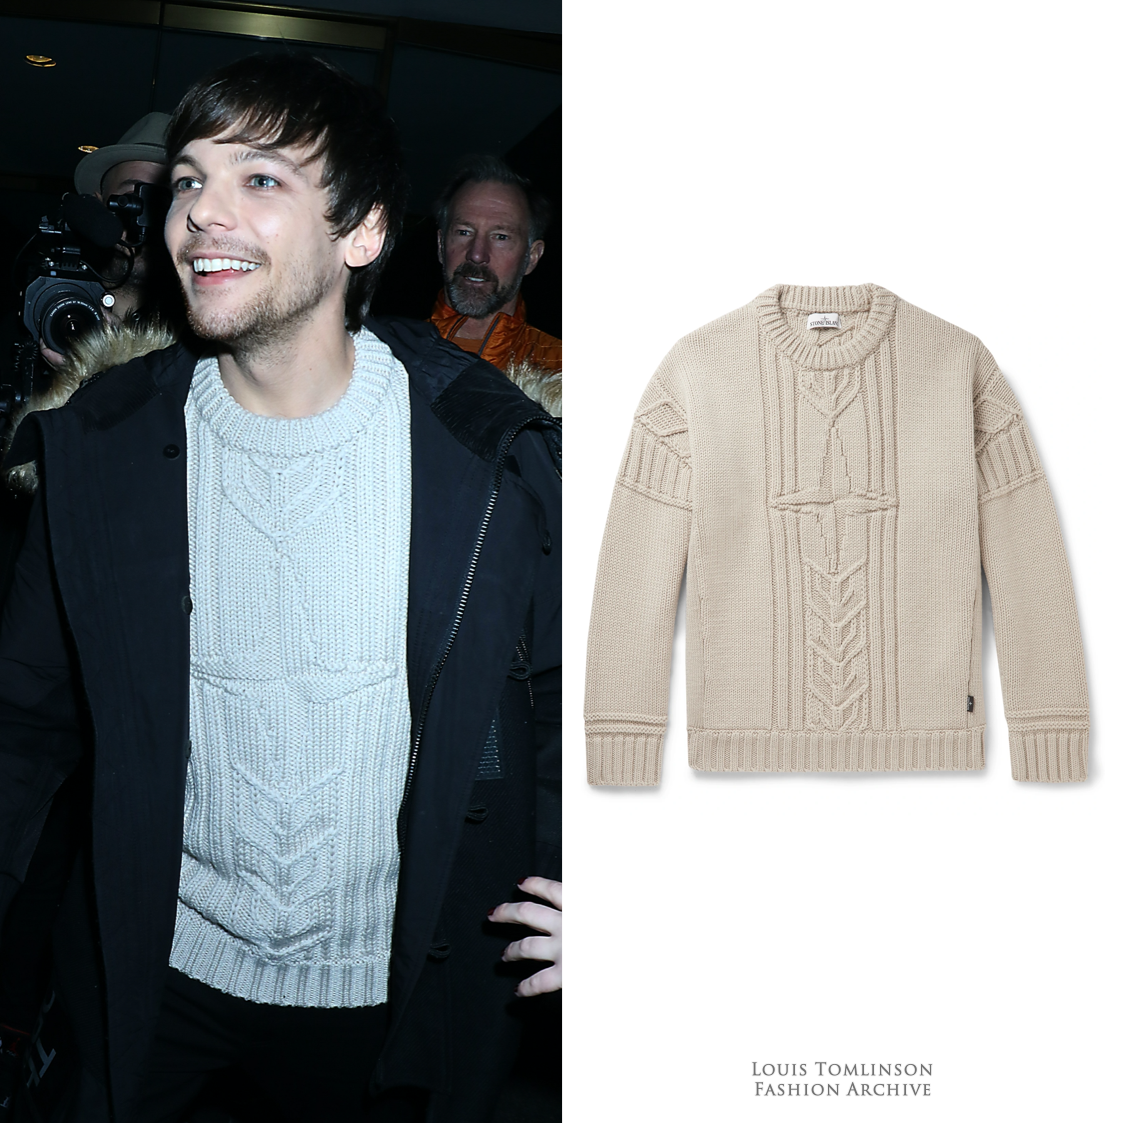 Louis Tomlinson Fashion Archive — Louis in the 'Two of Us' Music